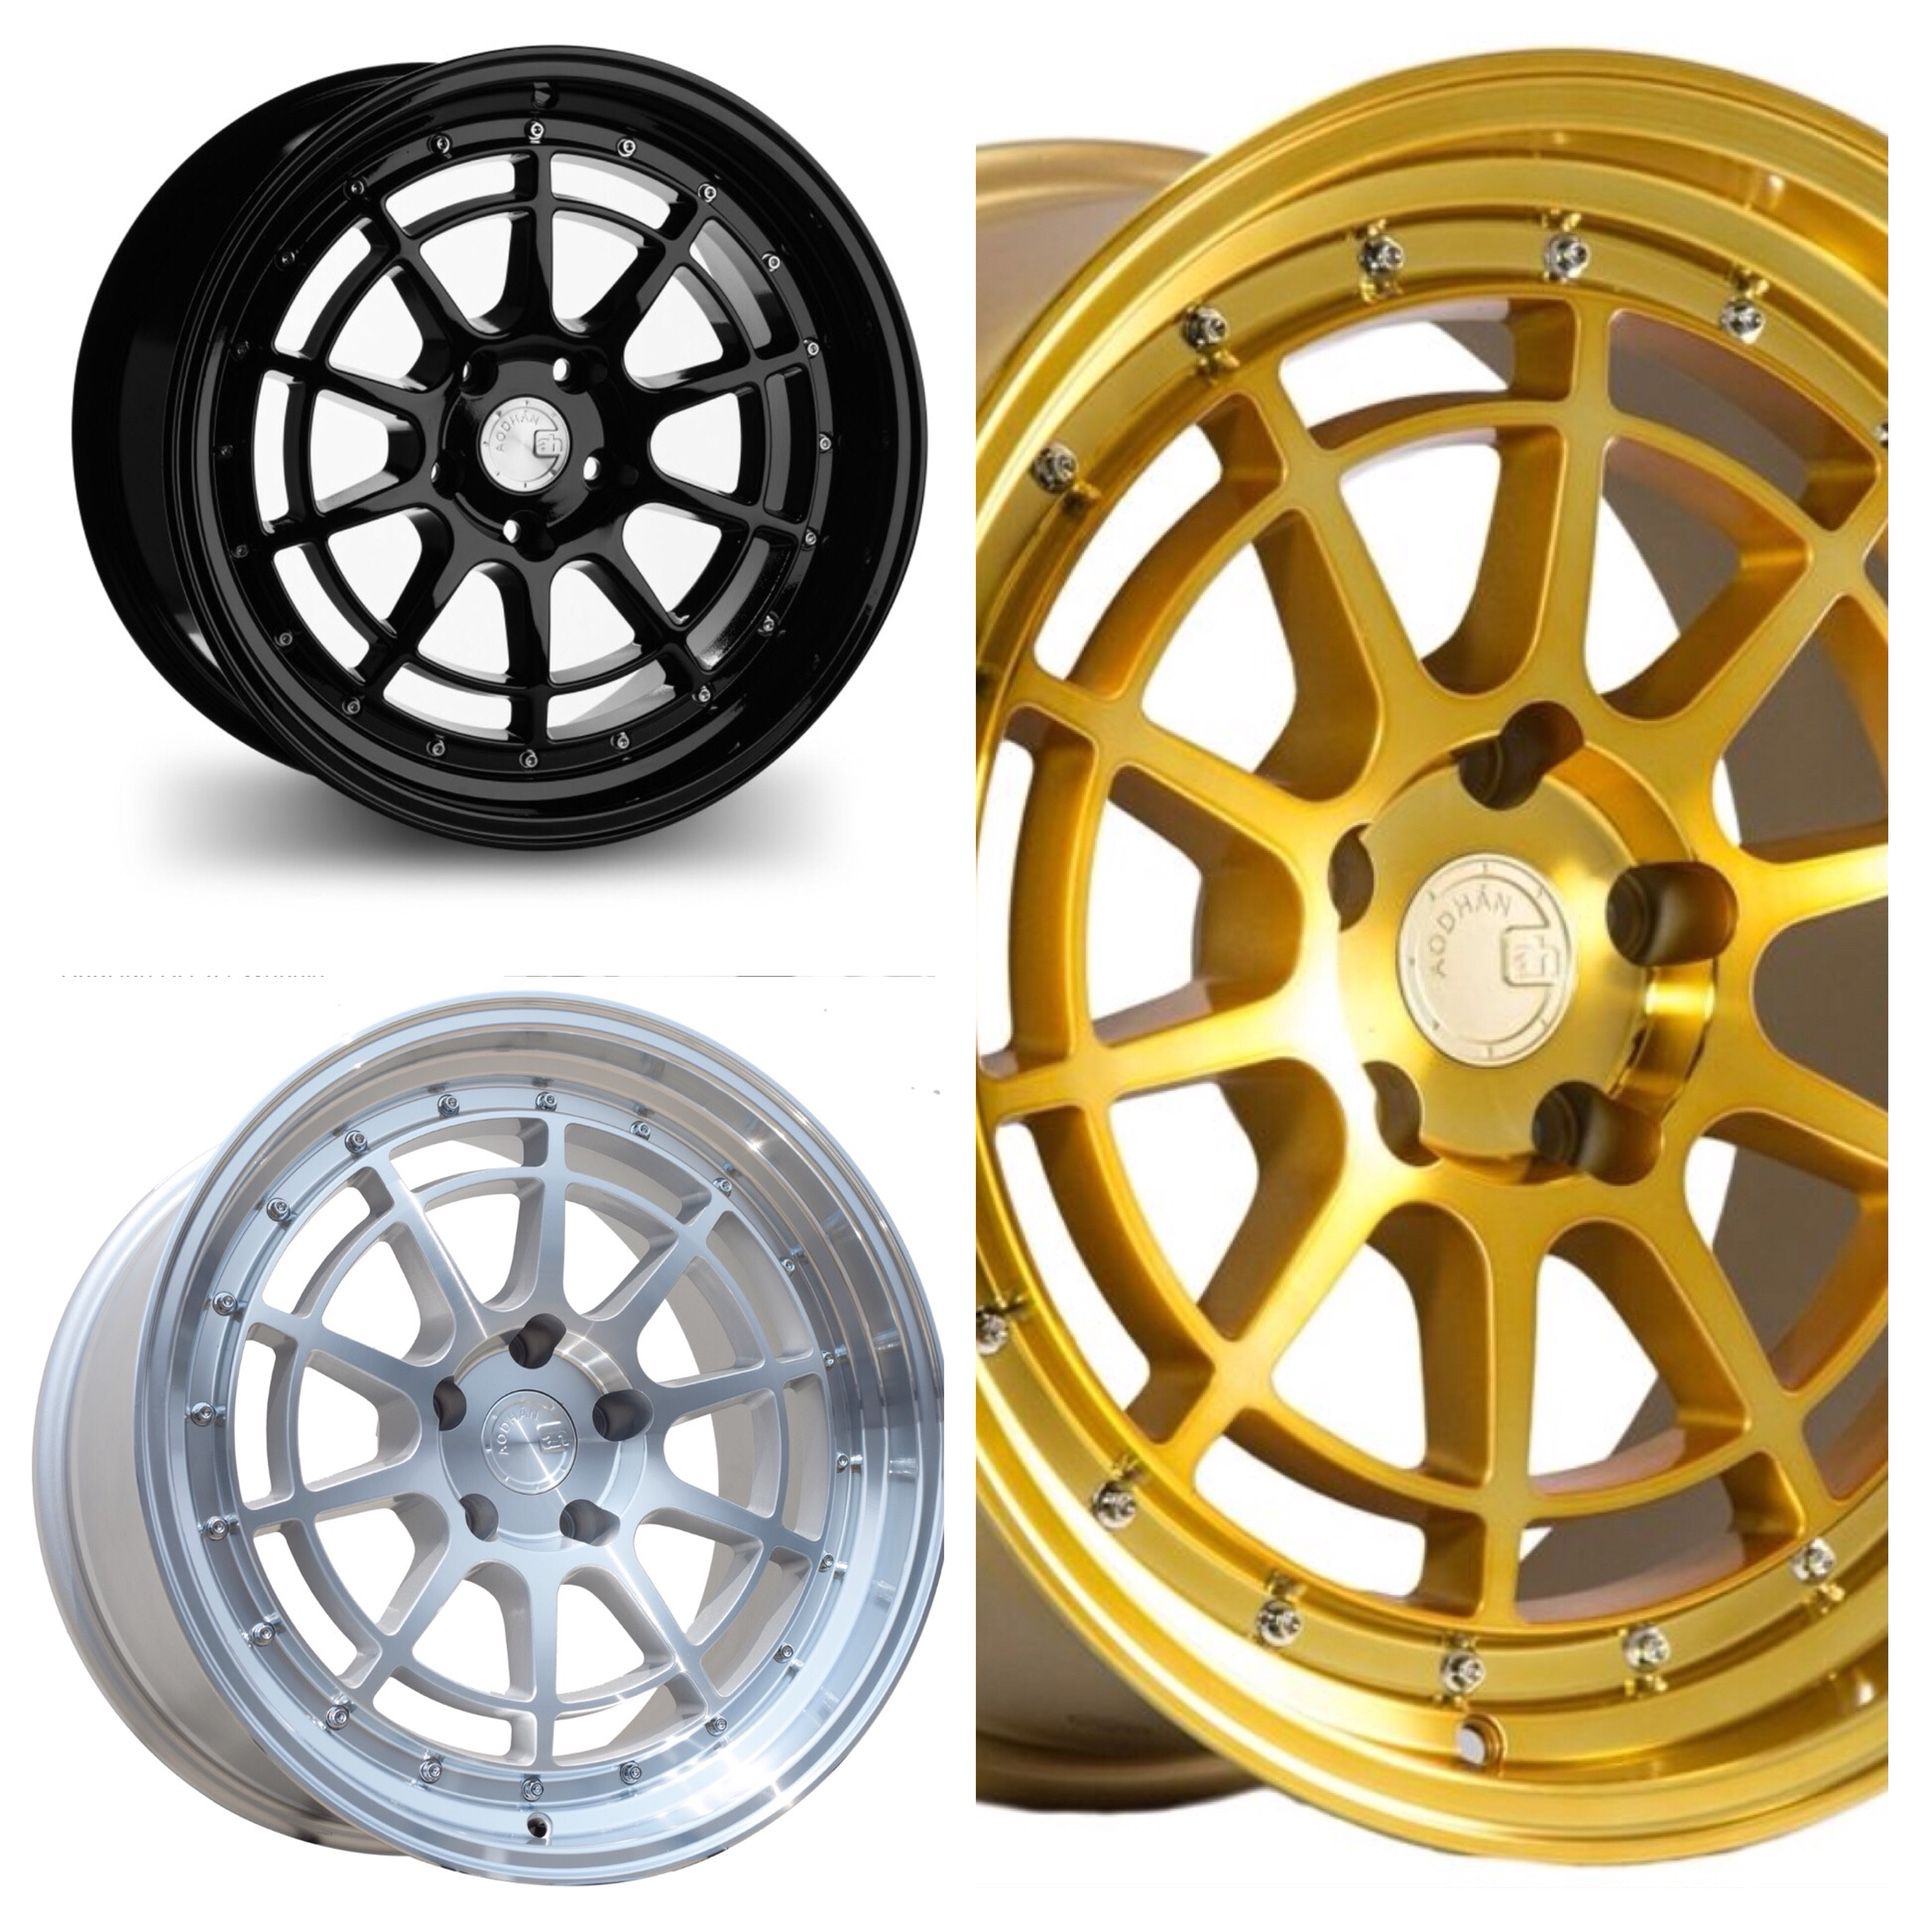 Aodhan Rim 18 inch 5x100 5x114 5x120 (only 50 down payment / no credit check)